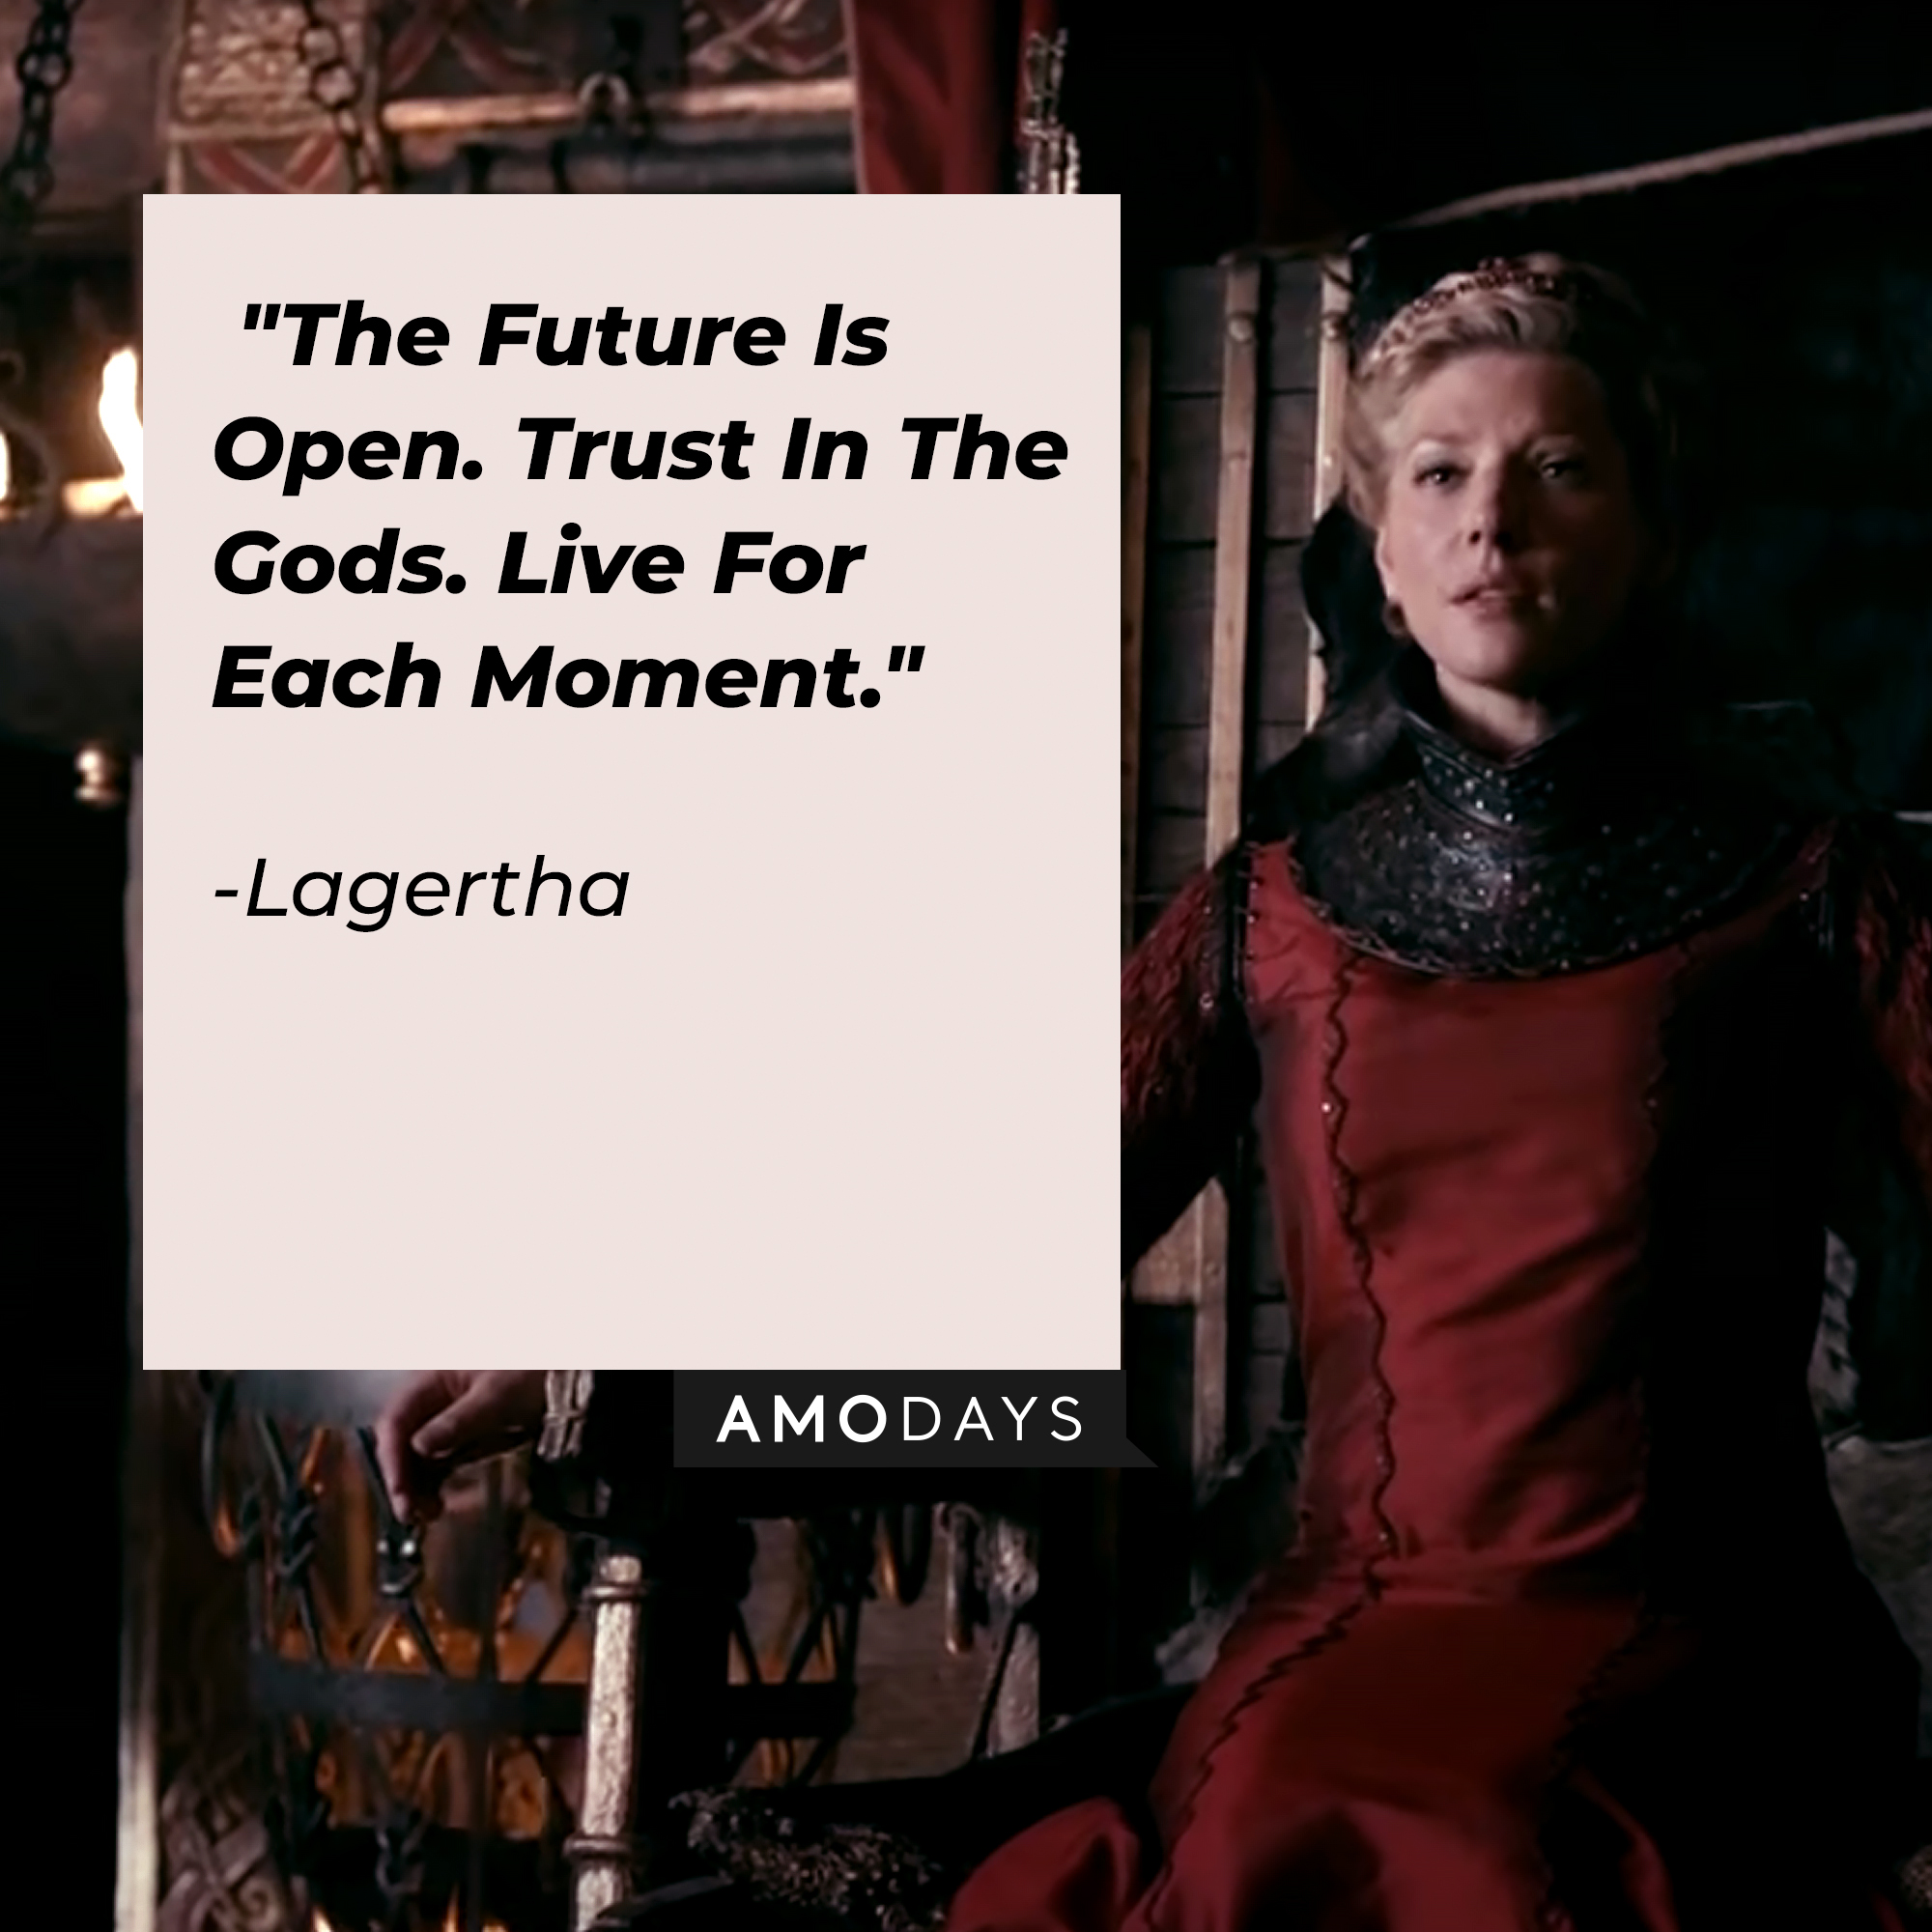 Lagertha's quote: "The Future Is Open. Trust In The Gods. Live For Each Moment." | Source: youtube.com/PrimeVideoUK